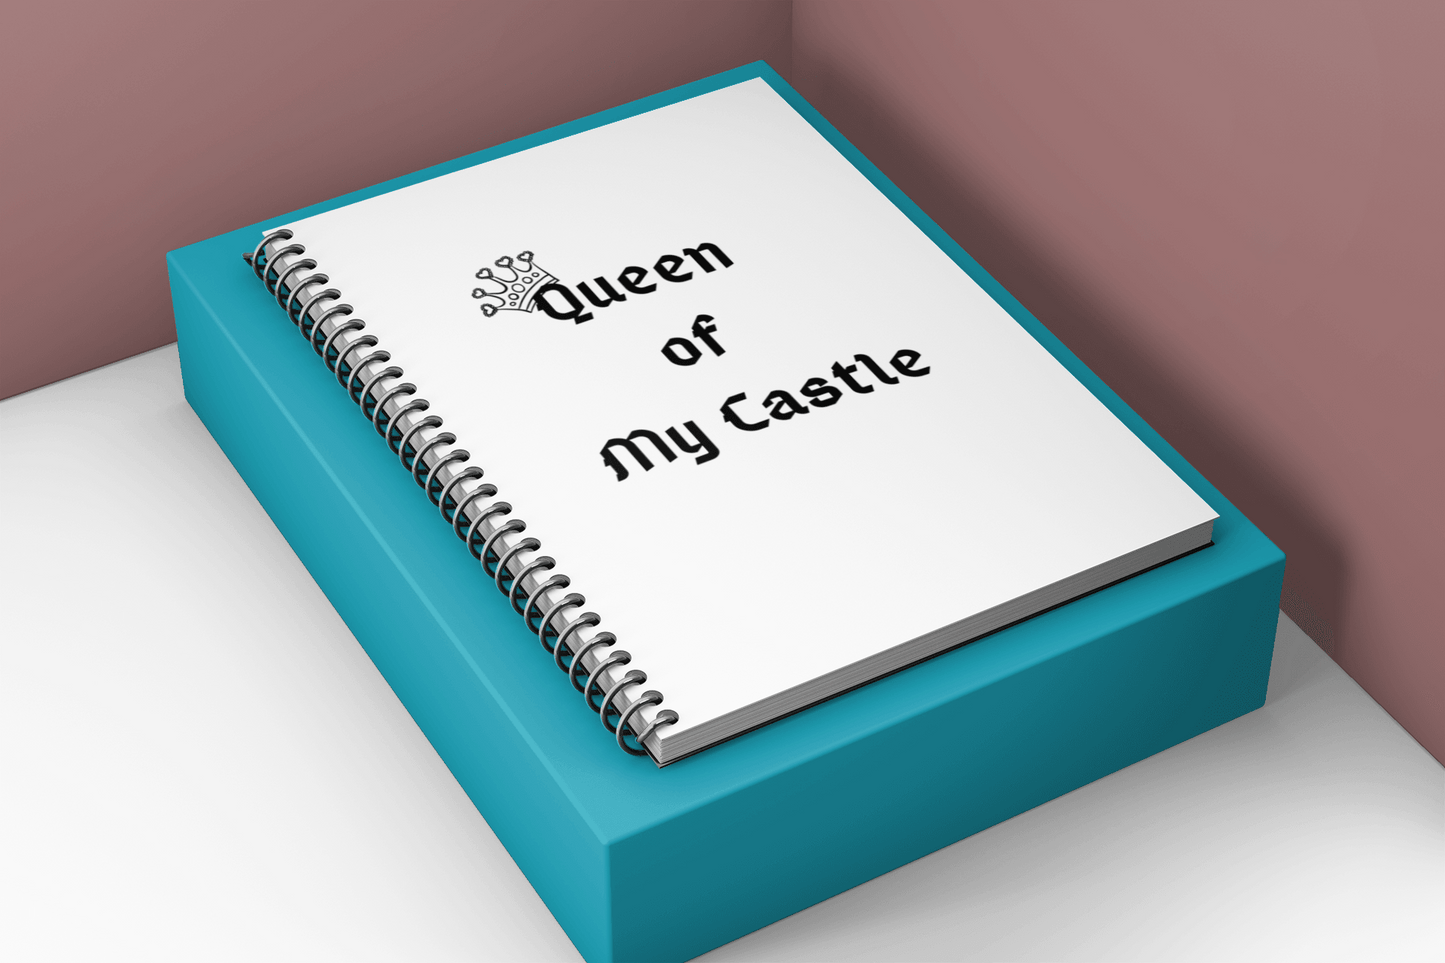 Queen of My Castle Notebook - Sharp Tact Kreativ | Tees & Gifts with Encouraging Messages to Brighten Your Day with a Bit of Wit